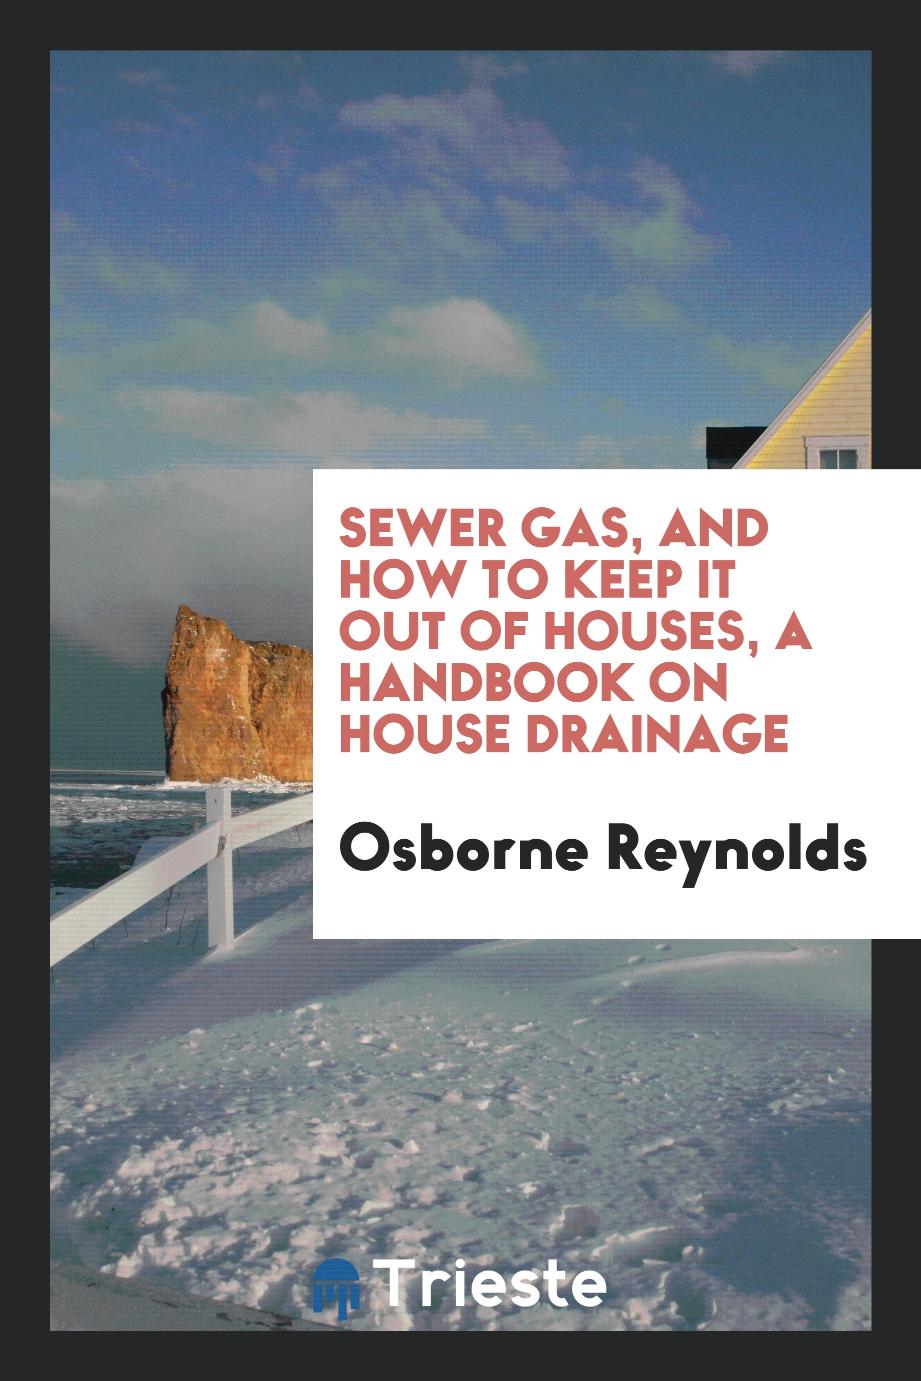 Sewer gas, and how to keep it out of houses, a handbook on house drainage